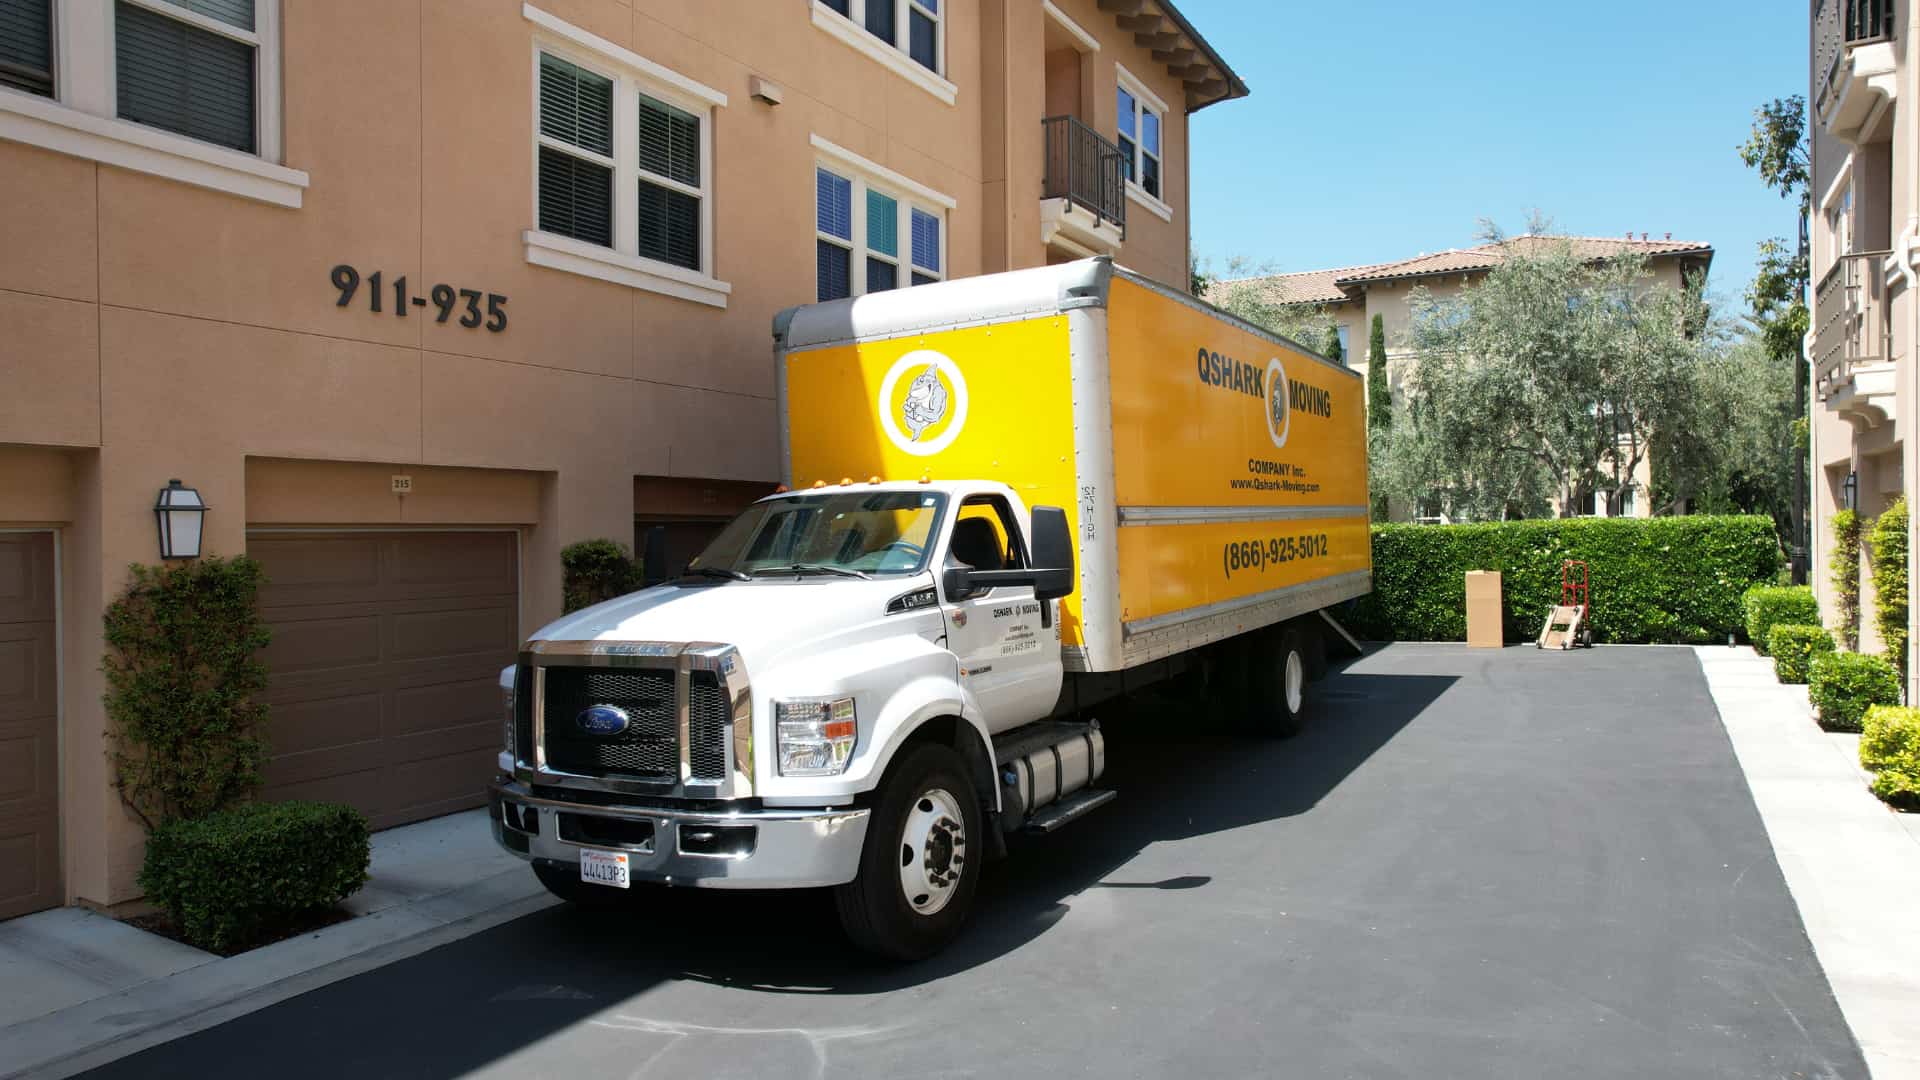 Affordable Piano Movers Los Angeles Area from Qshark Moving Company